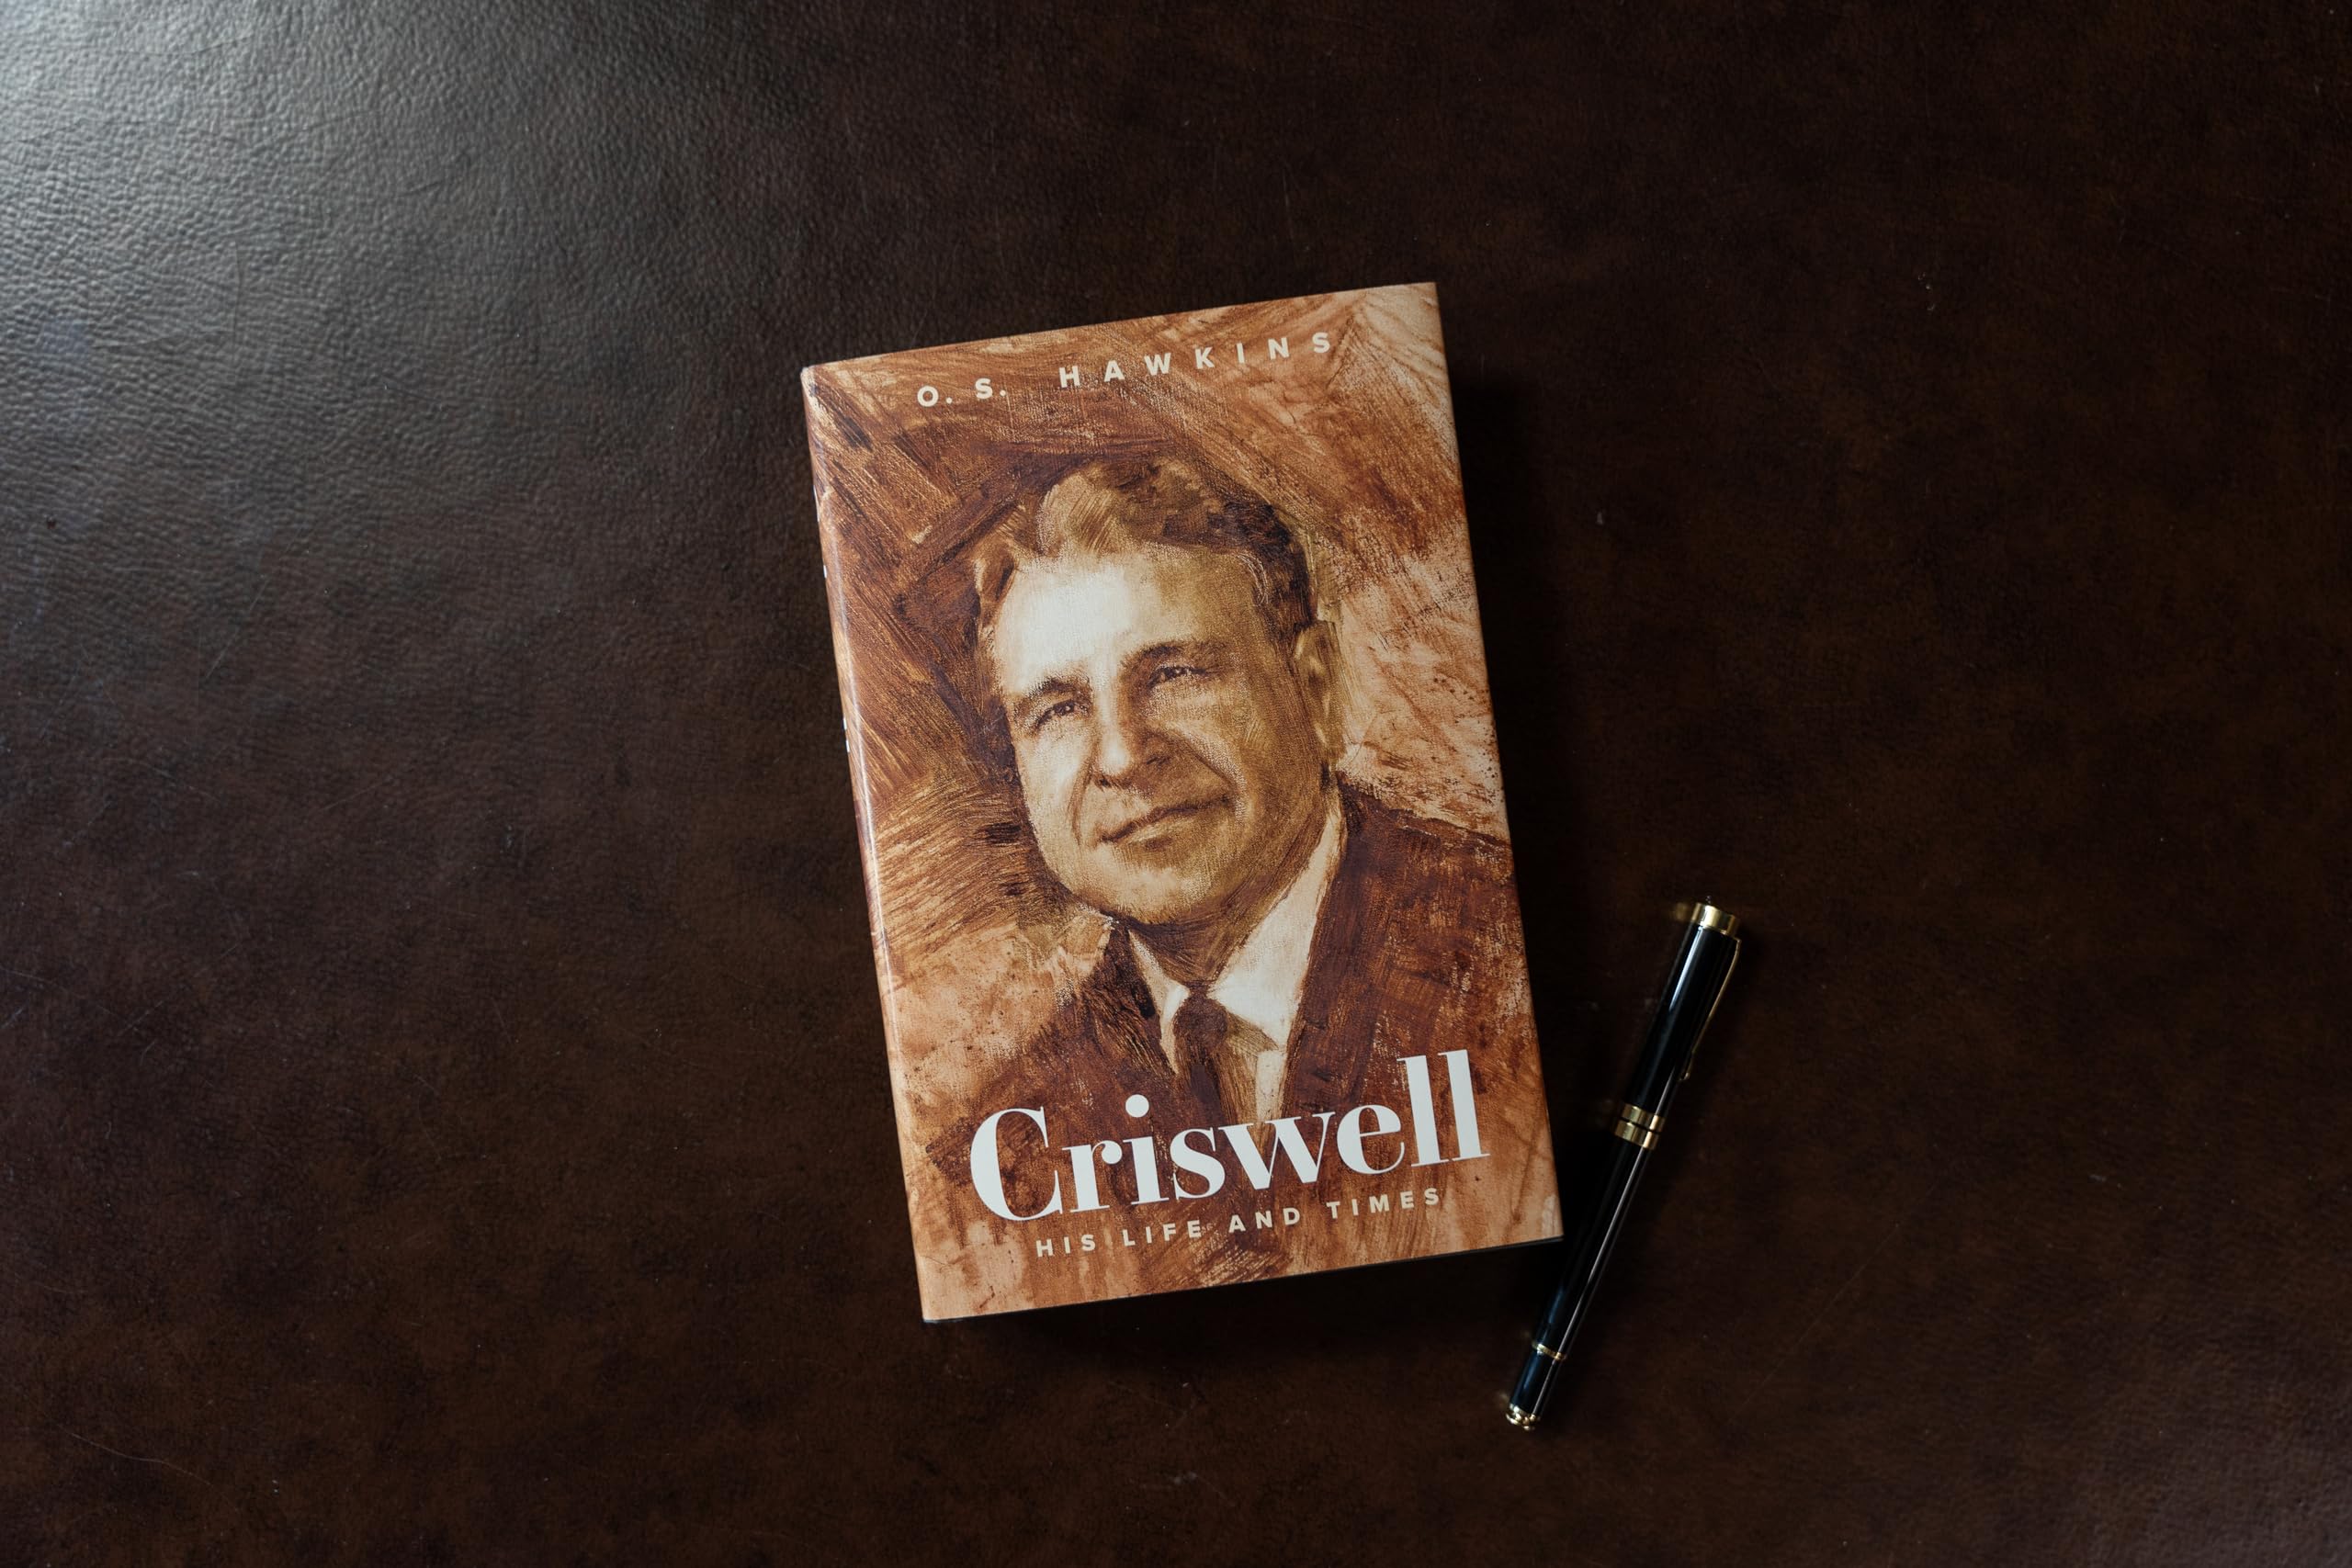 Criswell: His Life and Times